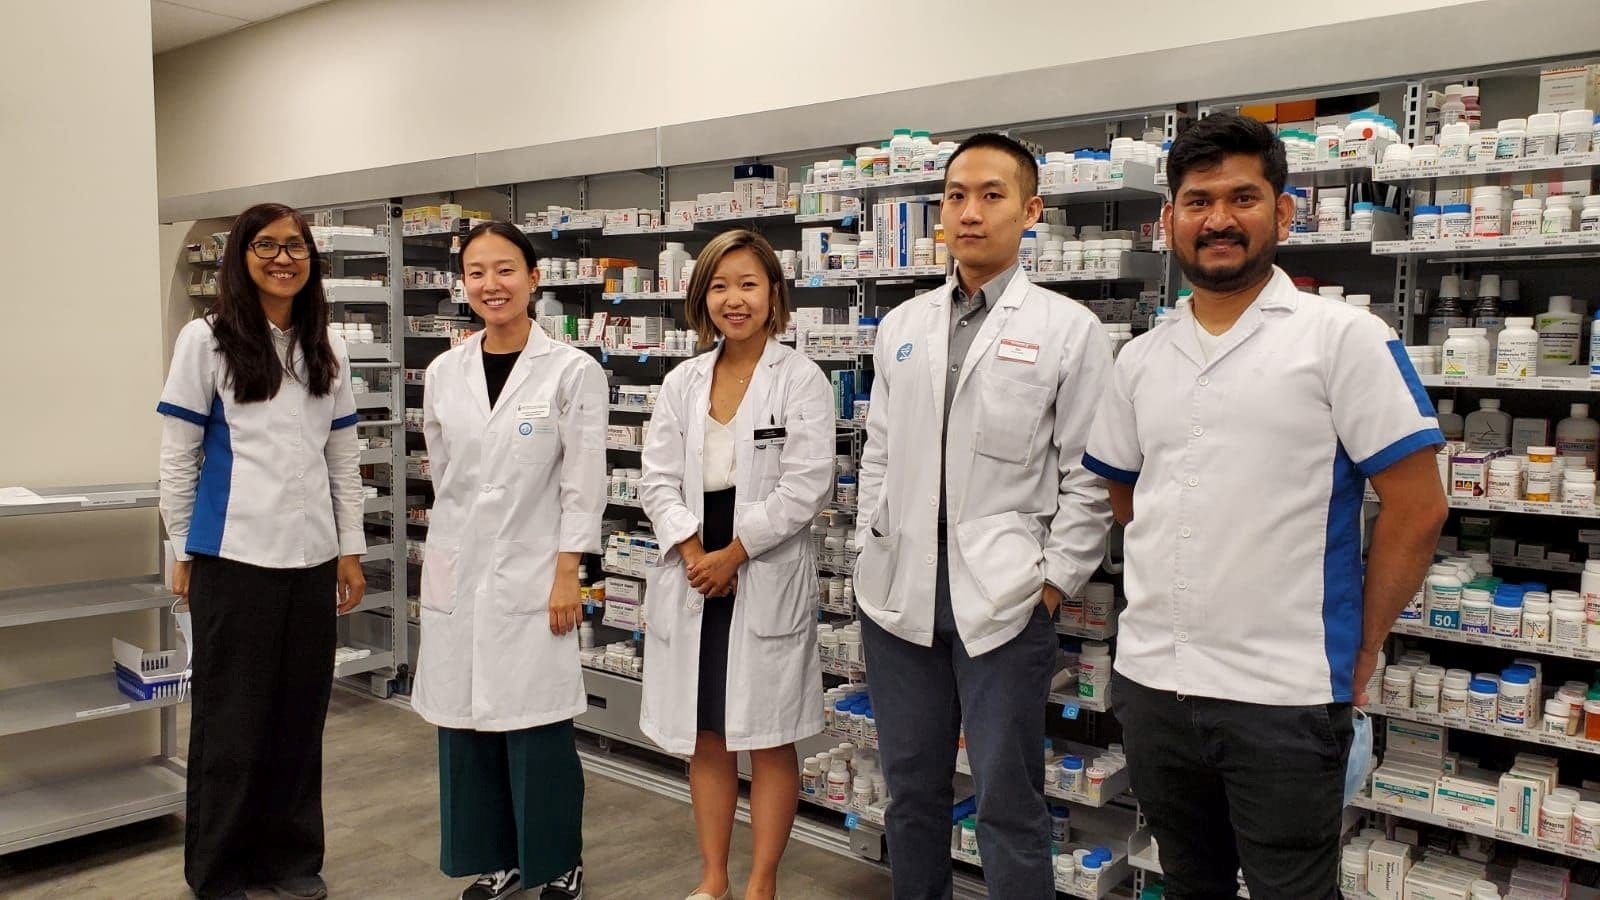 Lana with coworkers at the pharmacy